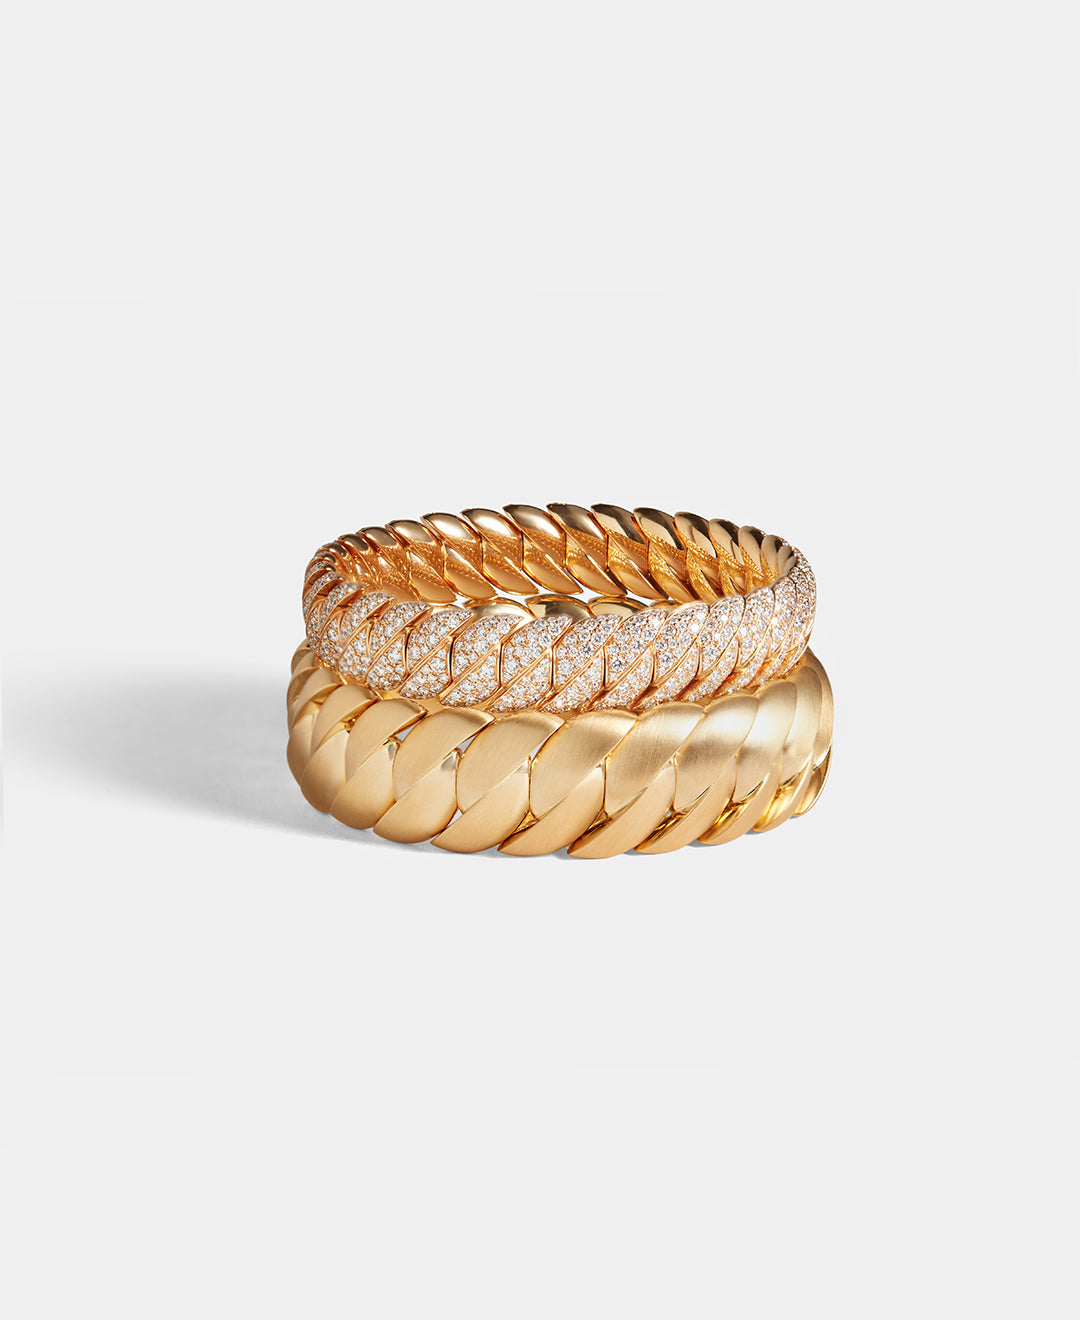 Two wave bracelets, one in yellow gold, and one in yellow gold with diamonds are displayed on a white background.